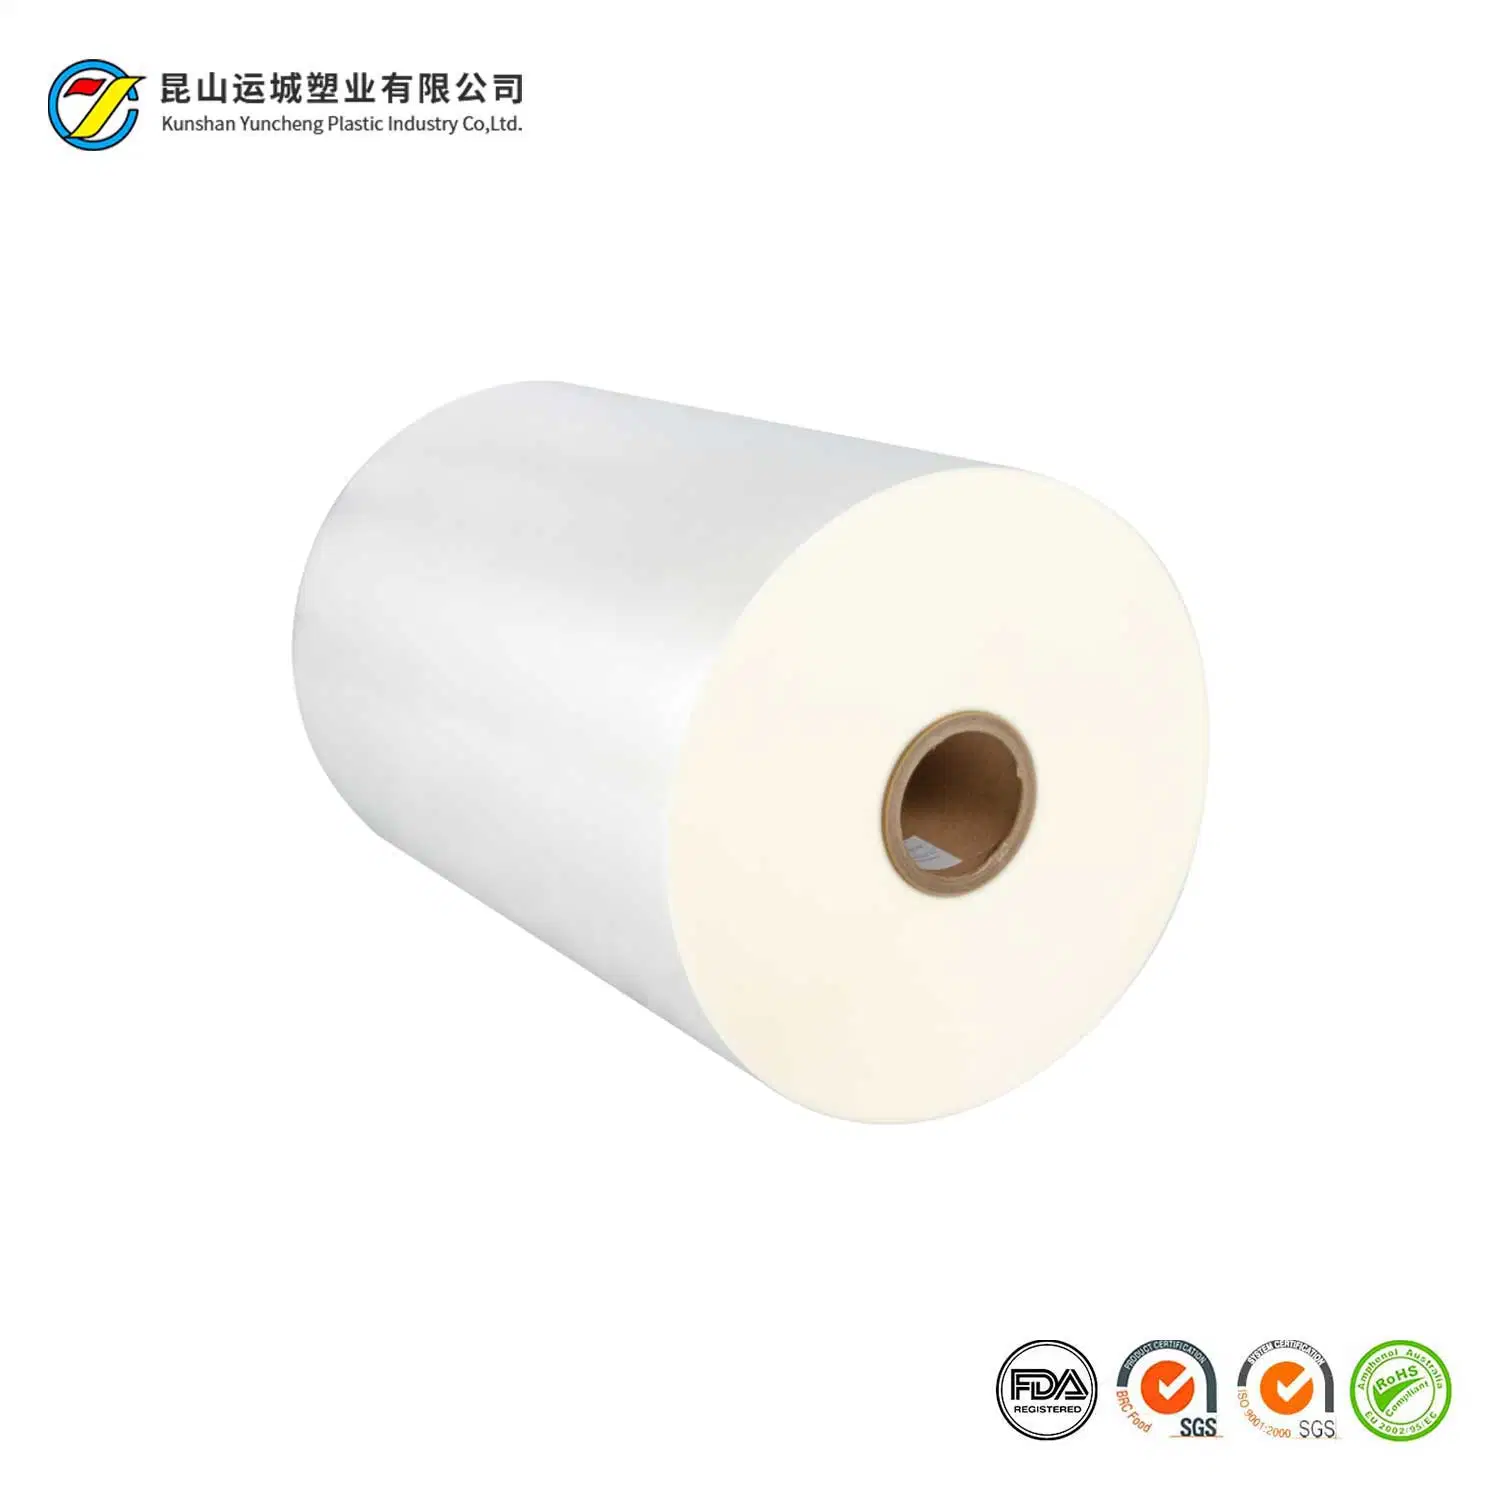 Plastic Packing Material with Air Bubbles by 15um Nylon Films